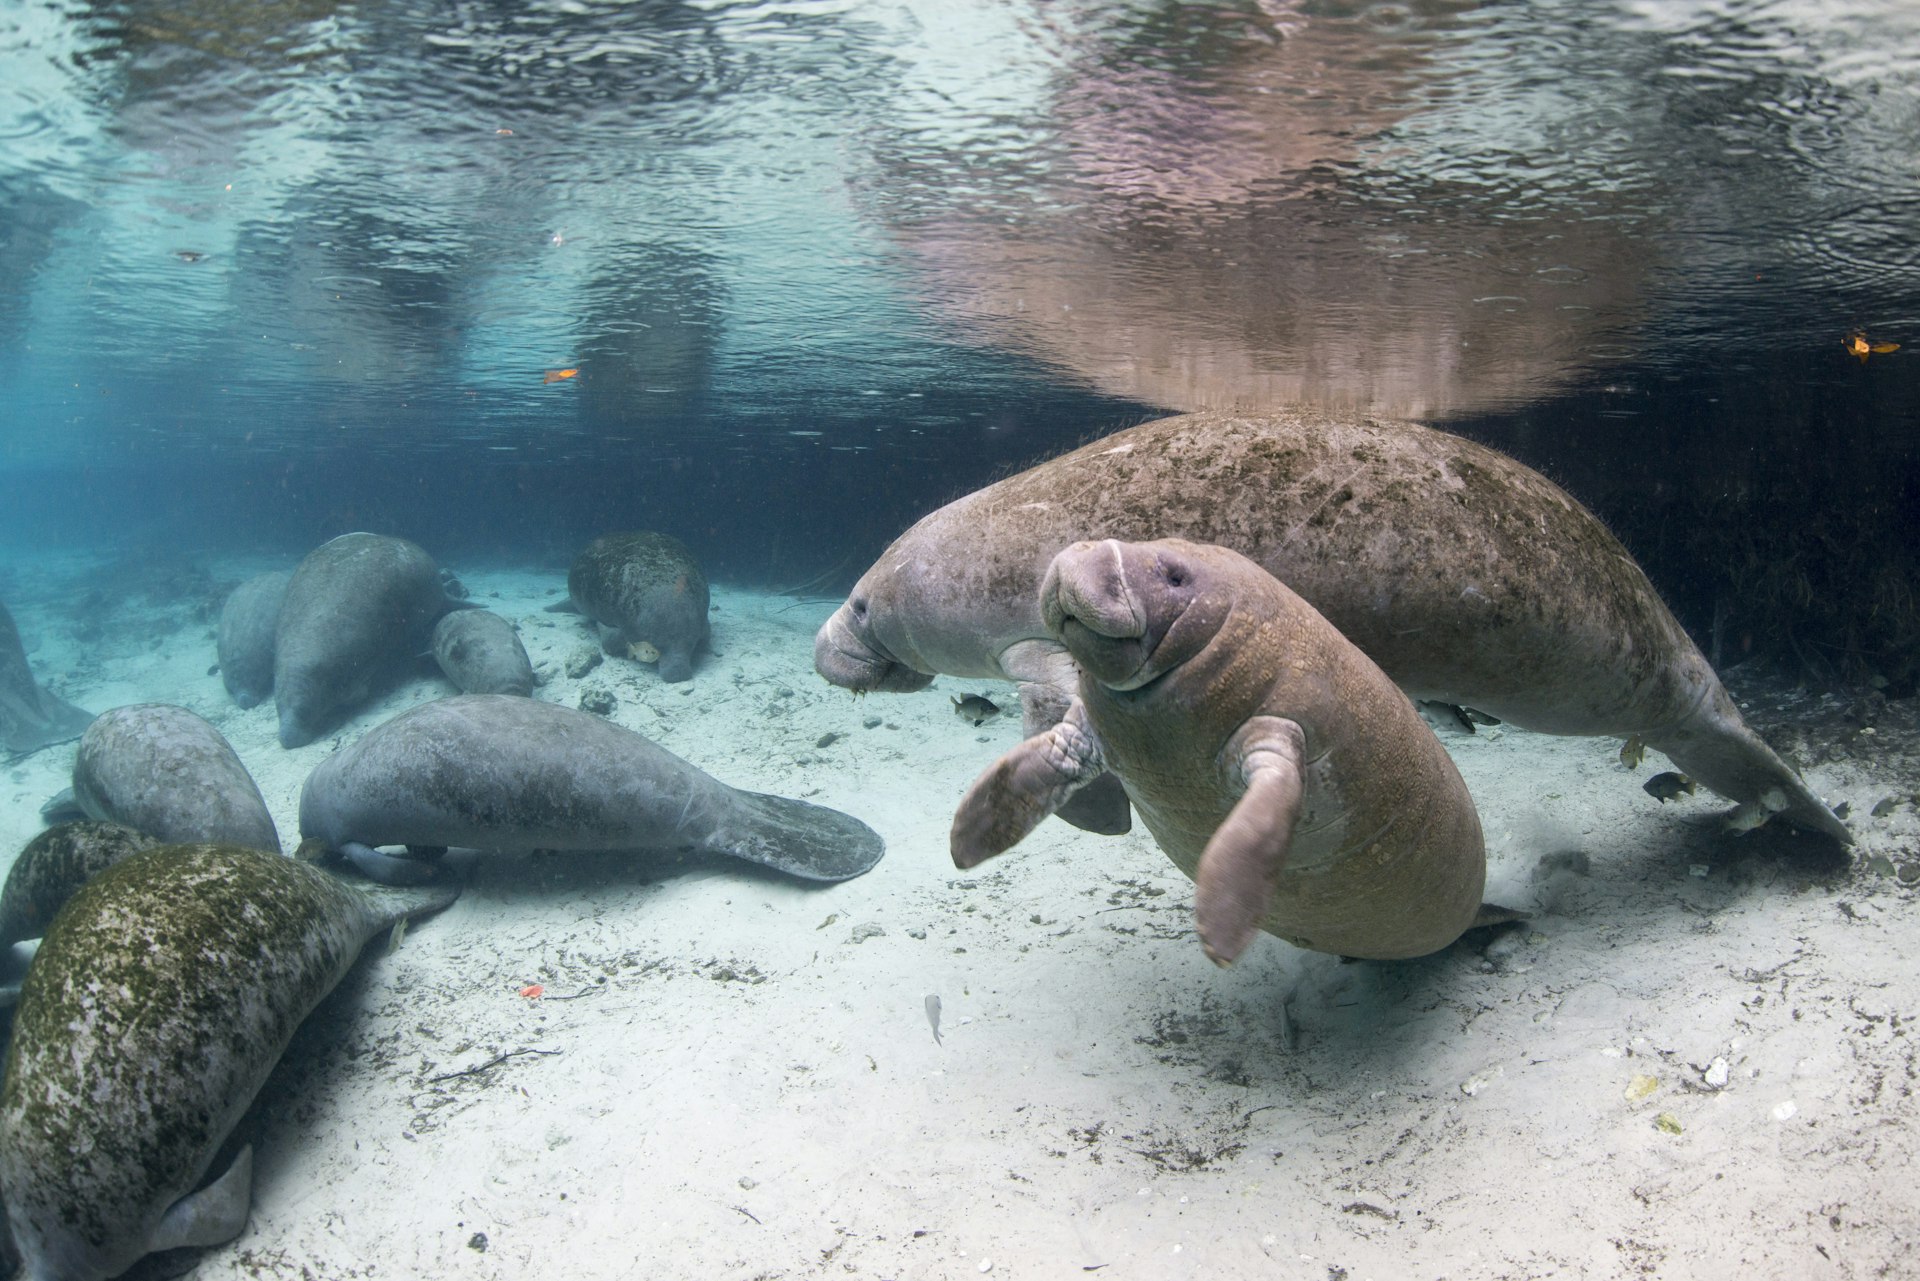 A small group of manatees gathered in clear shallow water in Florida